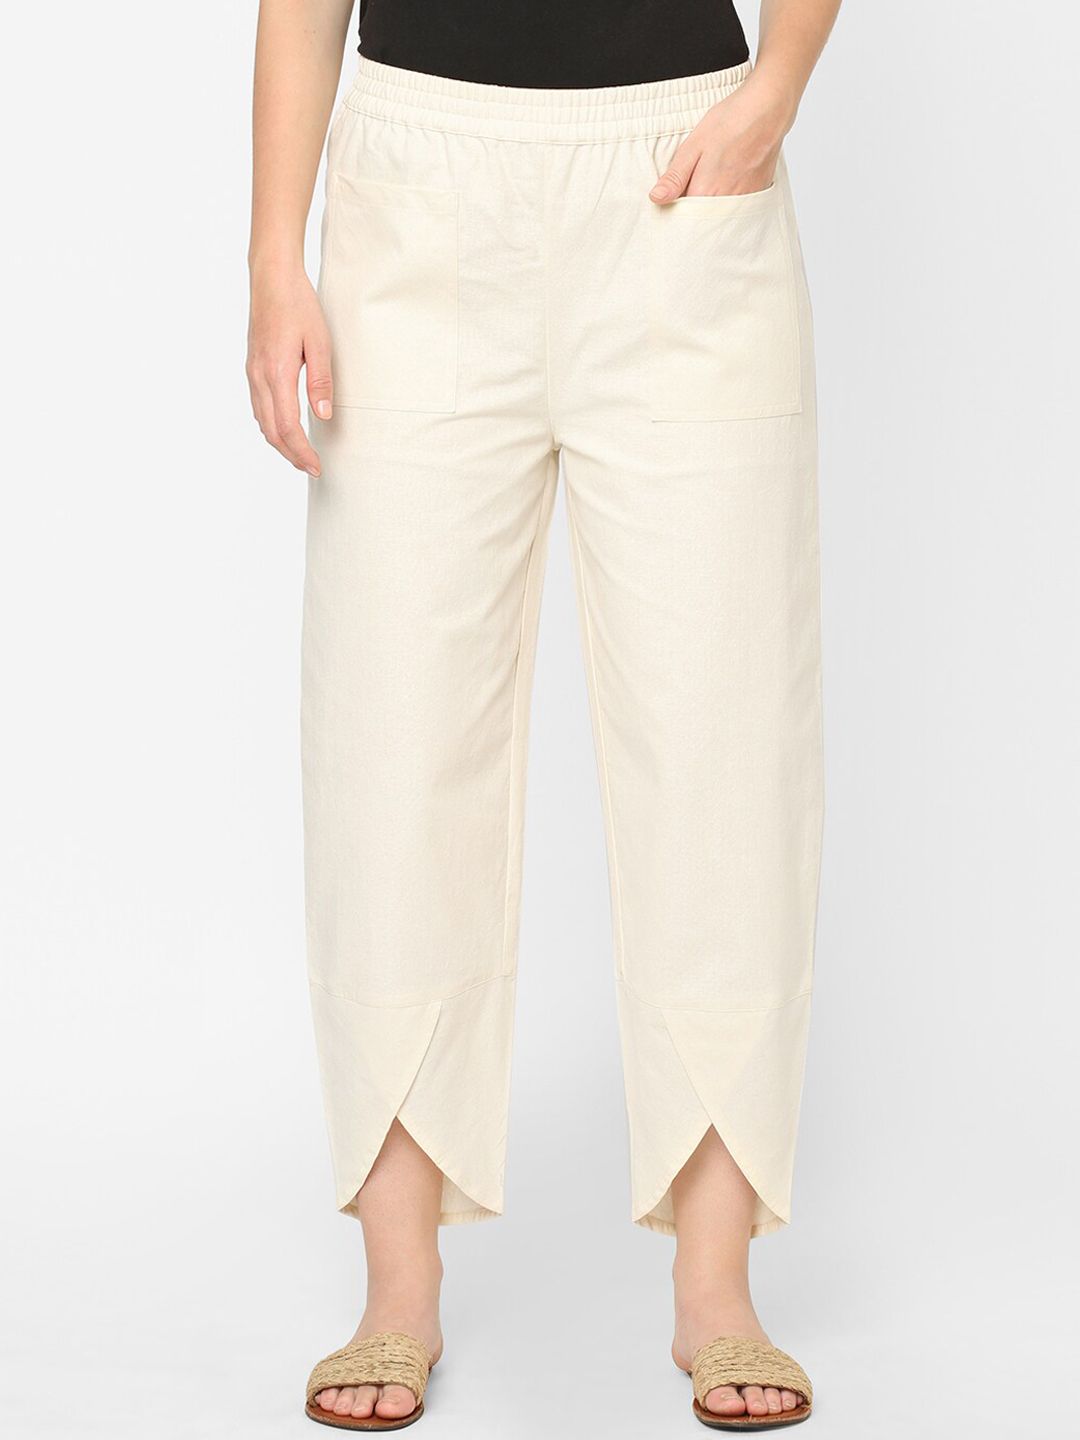 Mystere Paris Women Off White Solid Cotton Lounge Pant Price in India